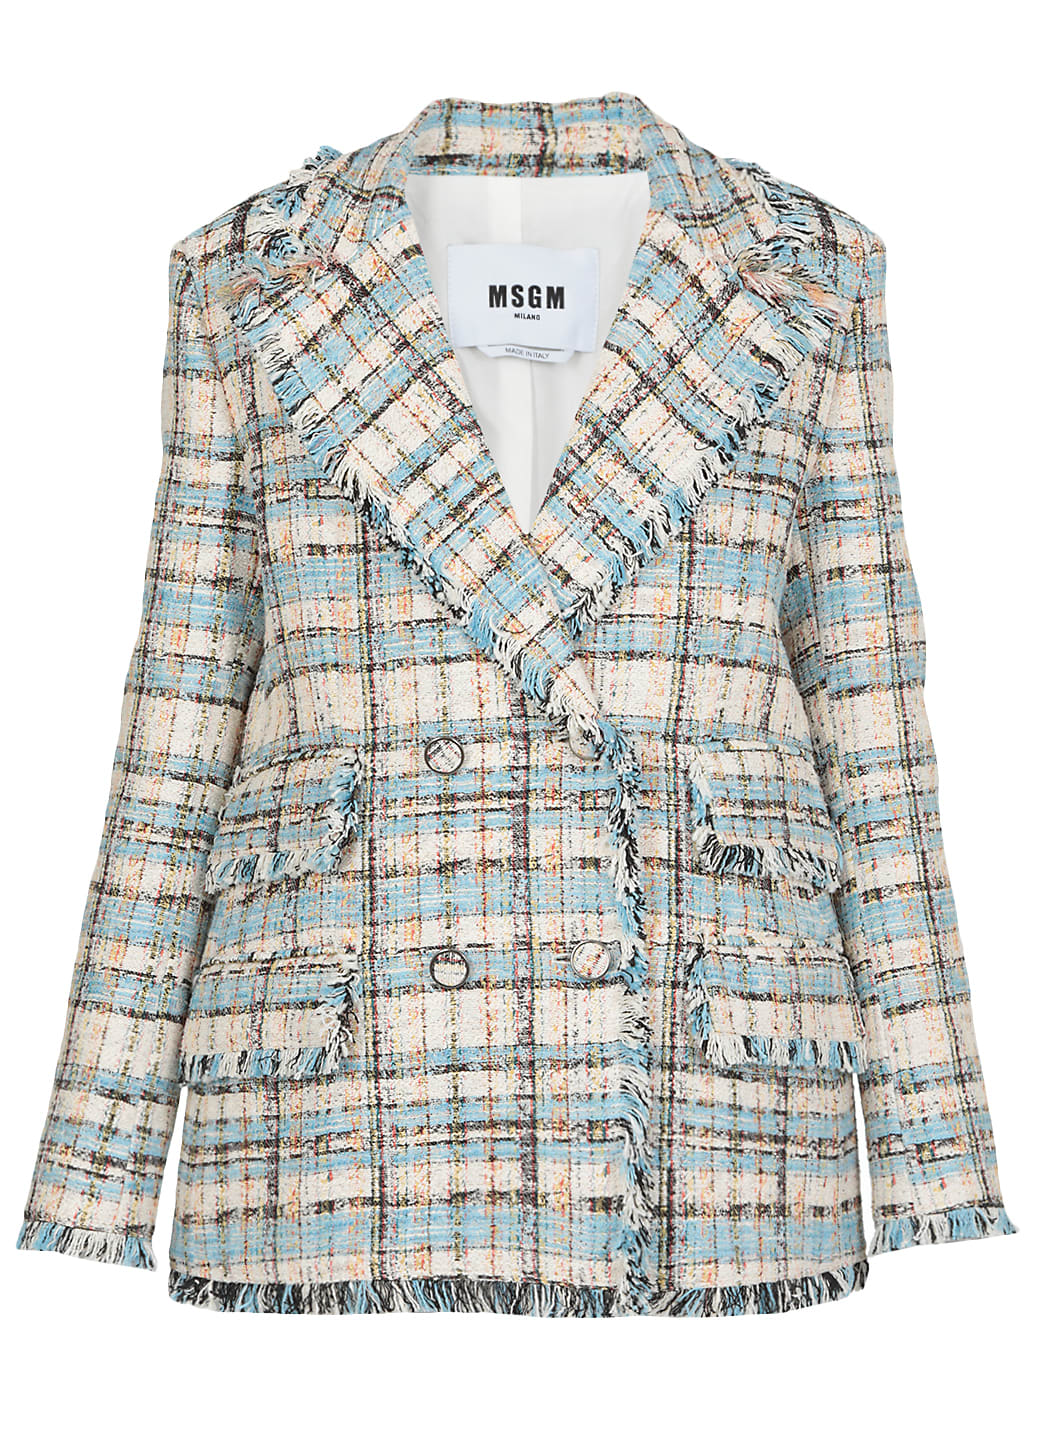 MSGM Tweed Double Breasted Jacket